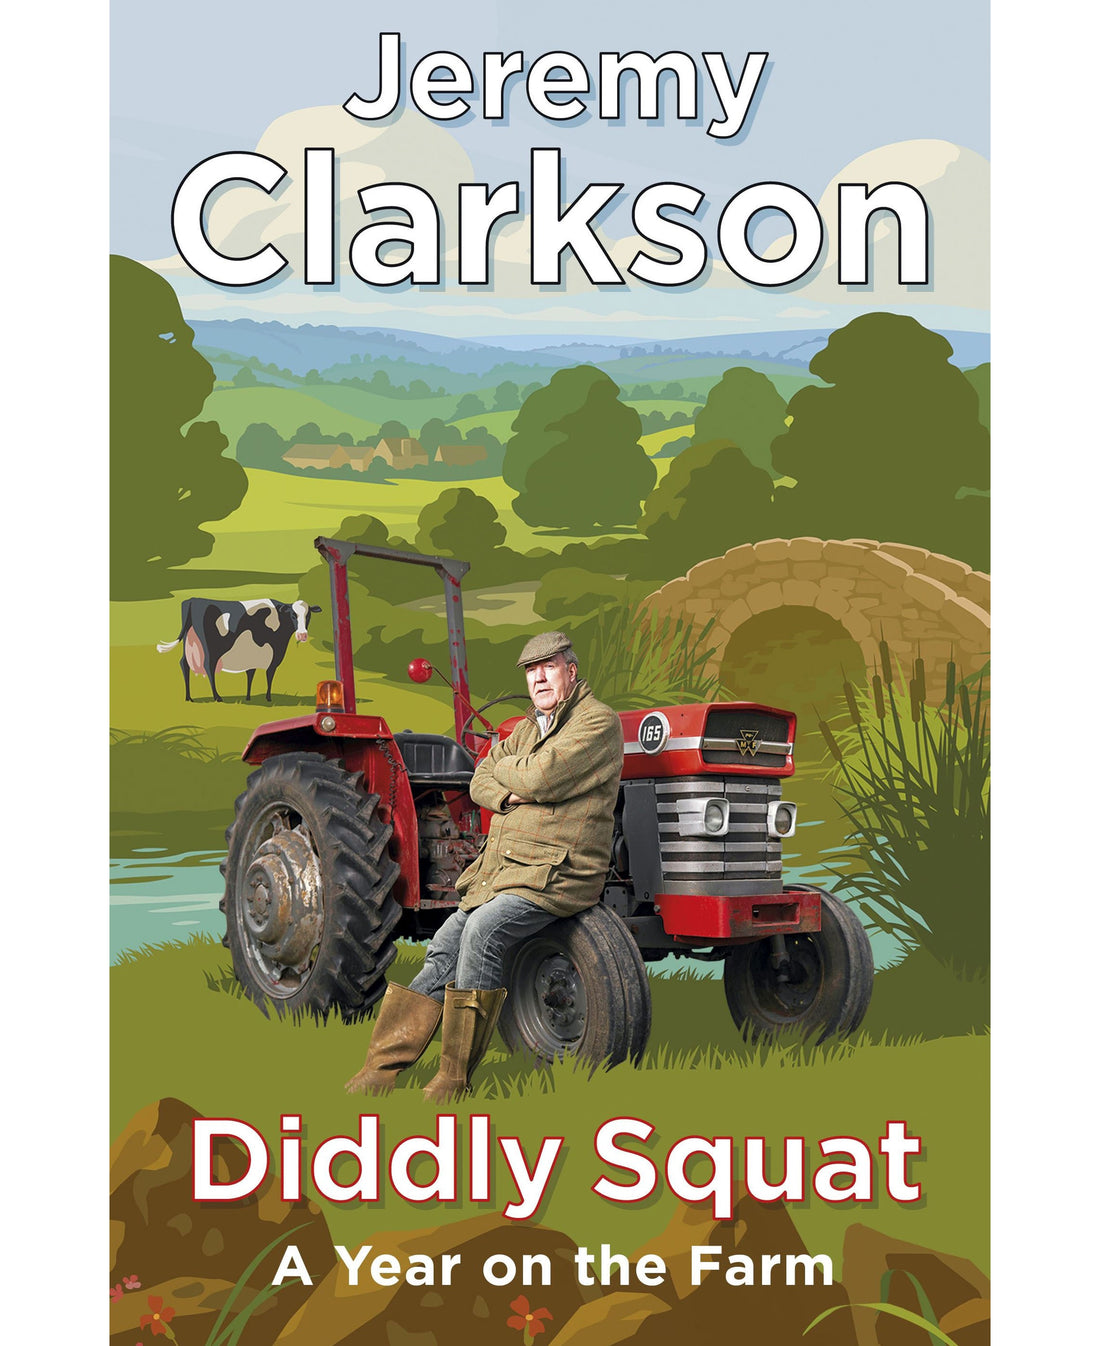 Diddly Squat: A Year On The Farm